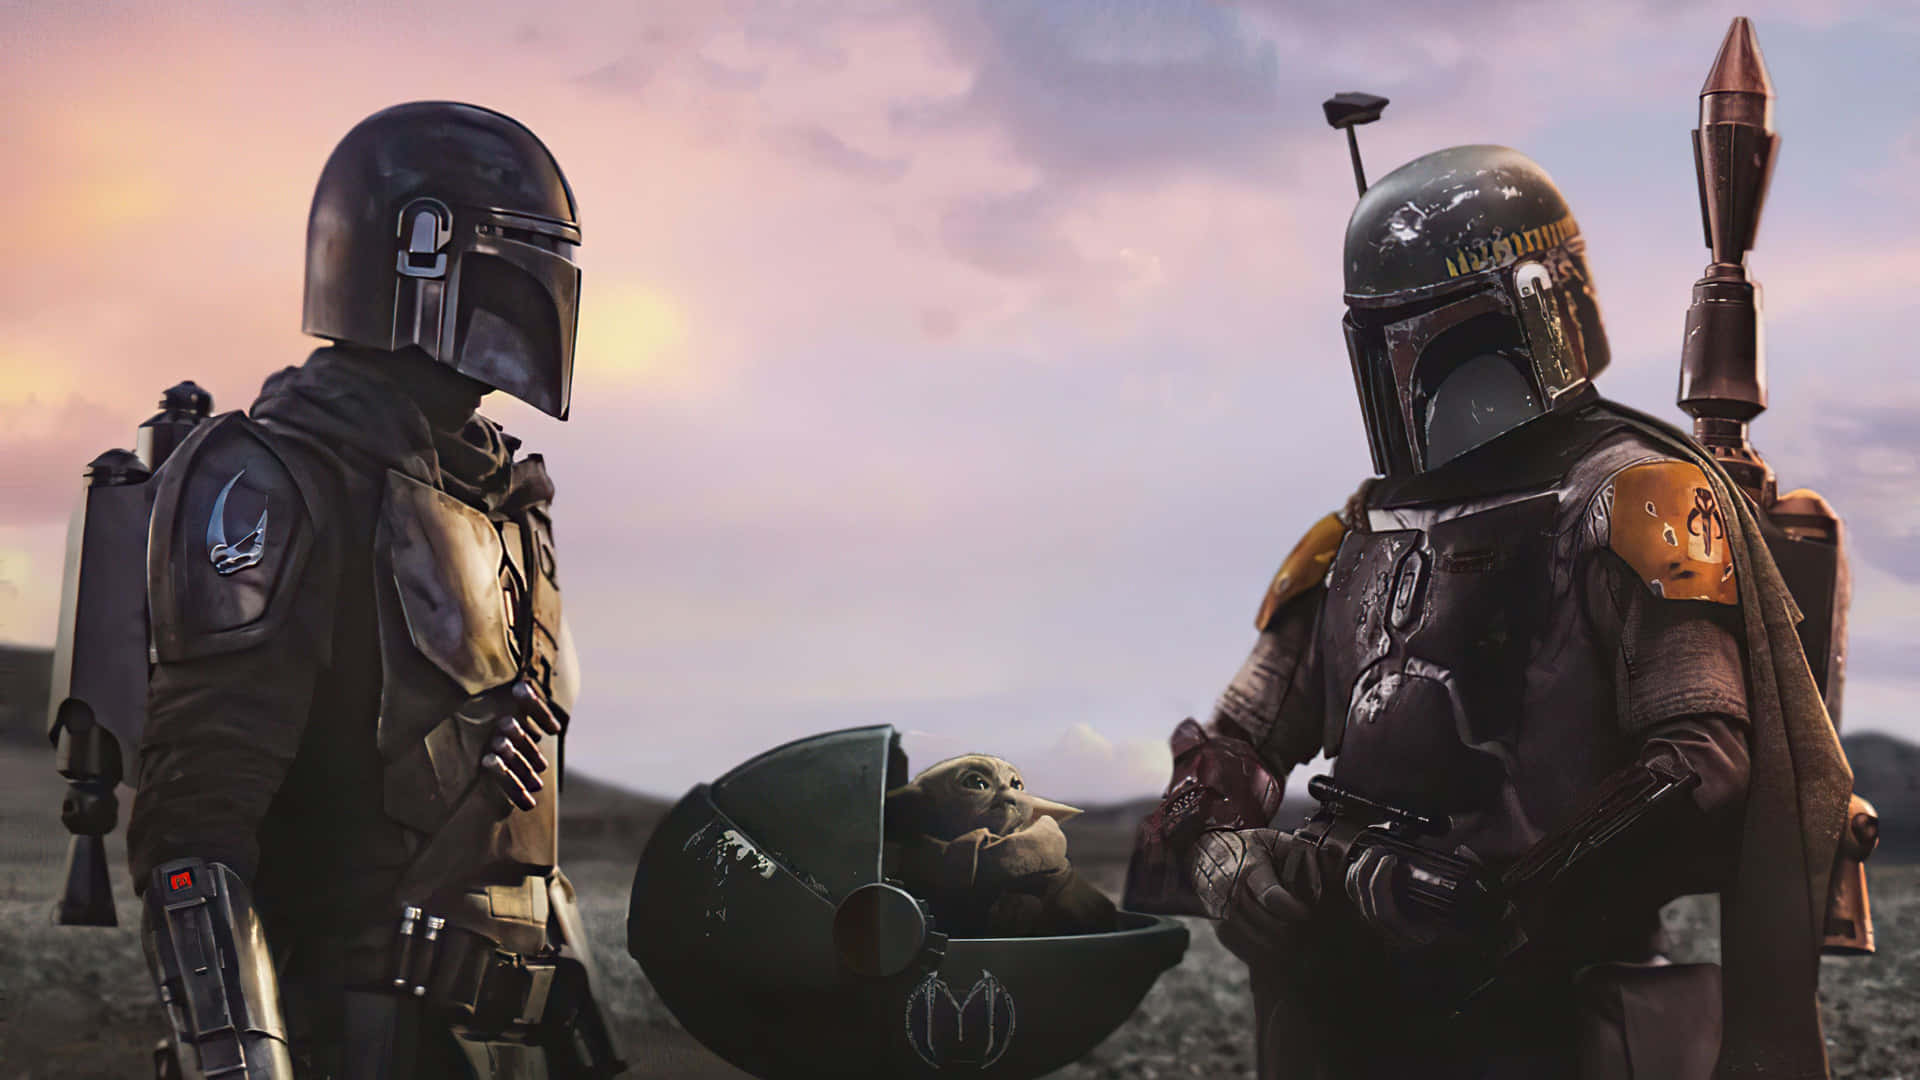 The Mandalorian Stands, Ready To Protect